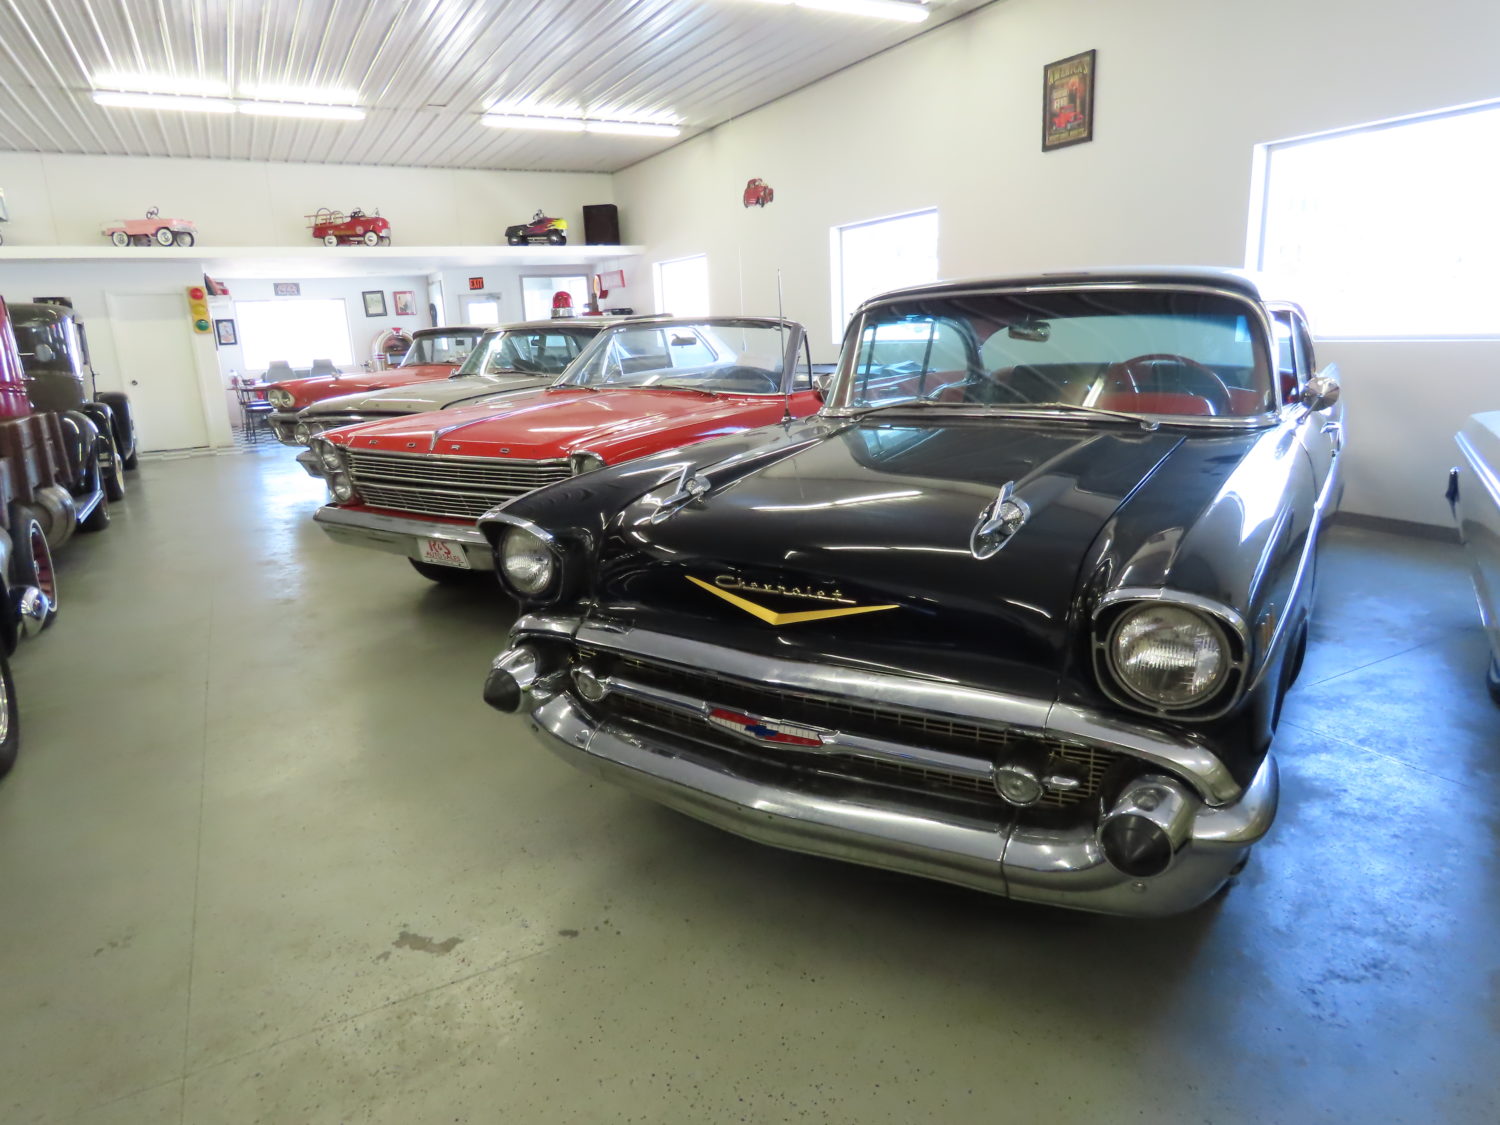 Approx. 100 American Classics Cars At Auction! The Sorensen Collection-LIVE ONSITE W/ONLINE BIDDING!  - image 1